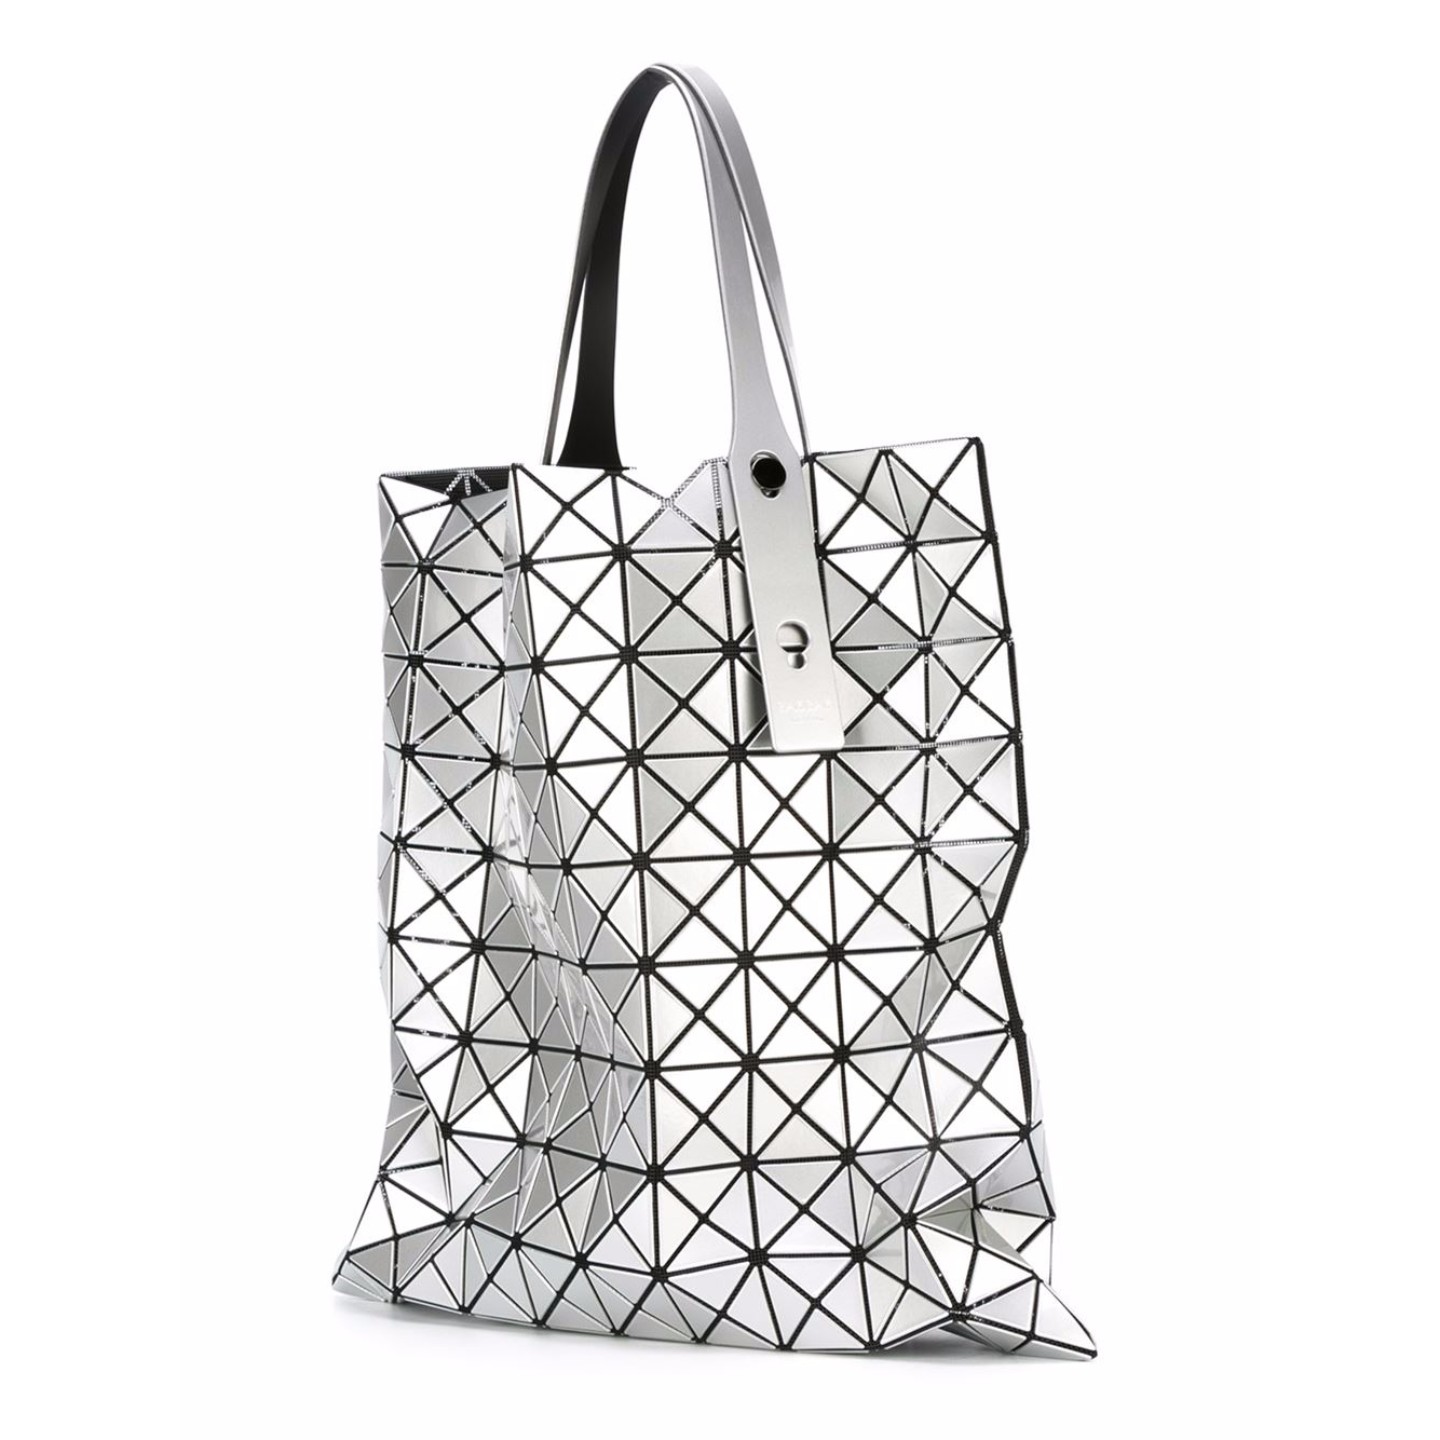 Issey Miyake Bao Bao Prism Tote, Silver - LabelCentric